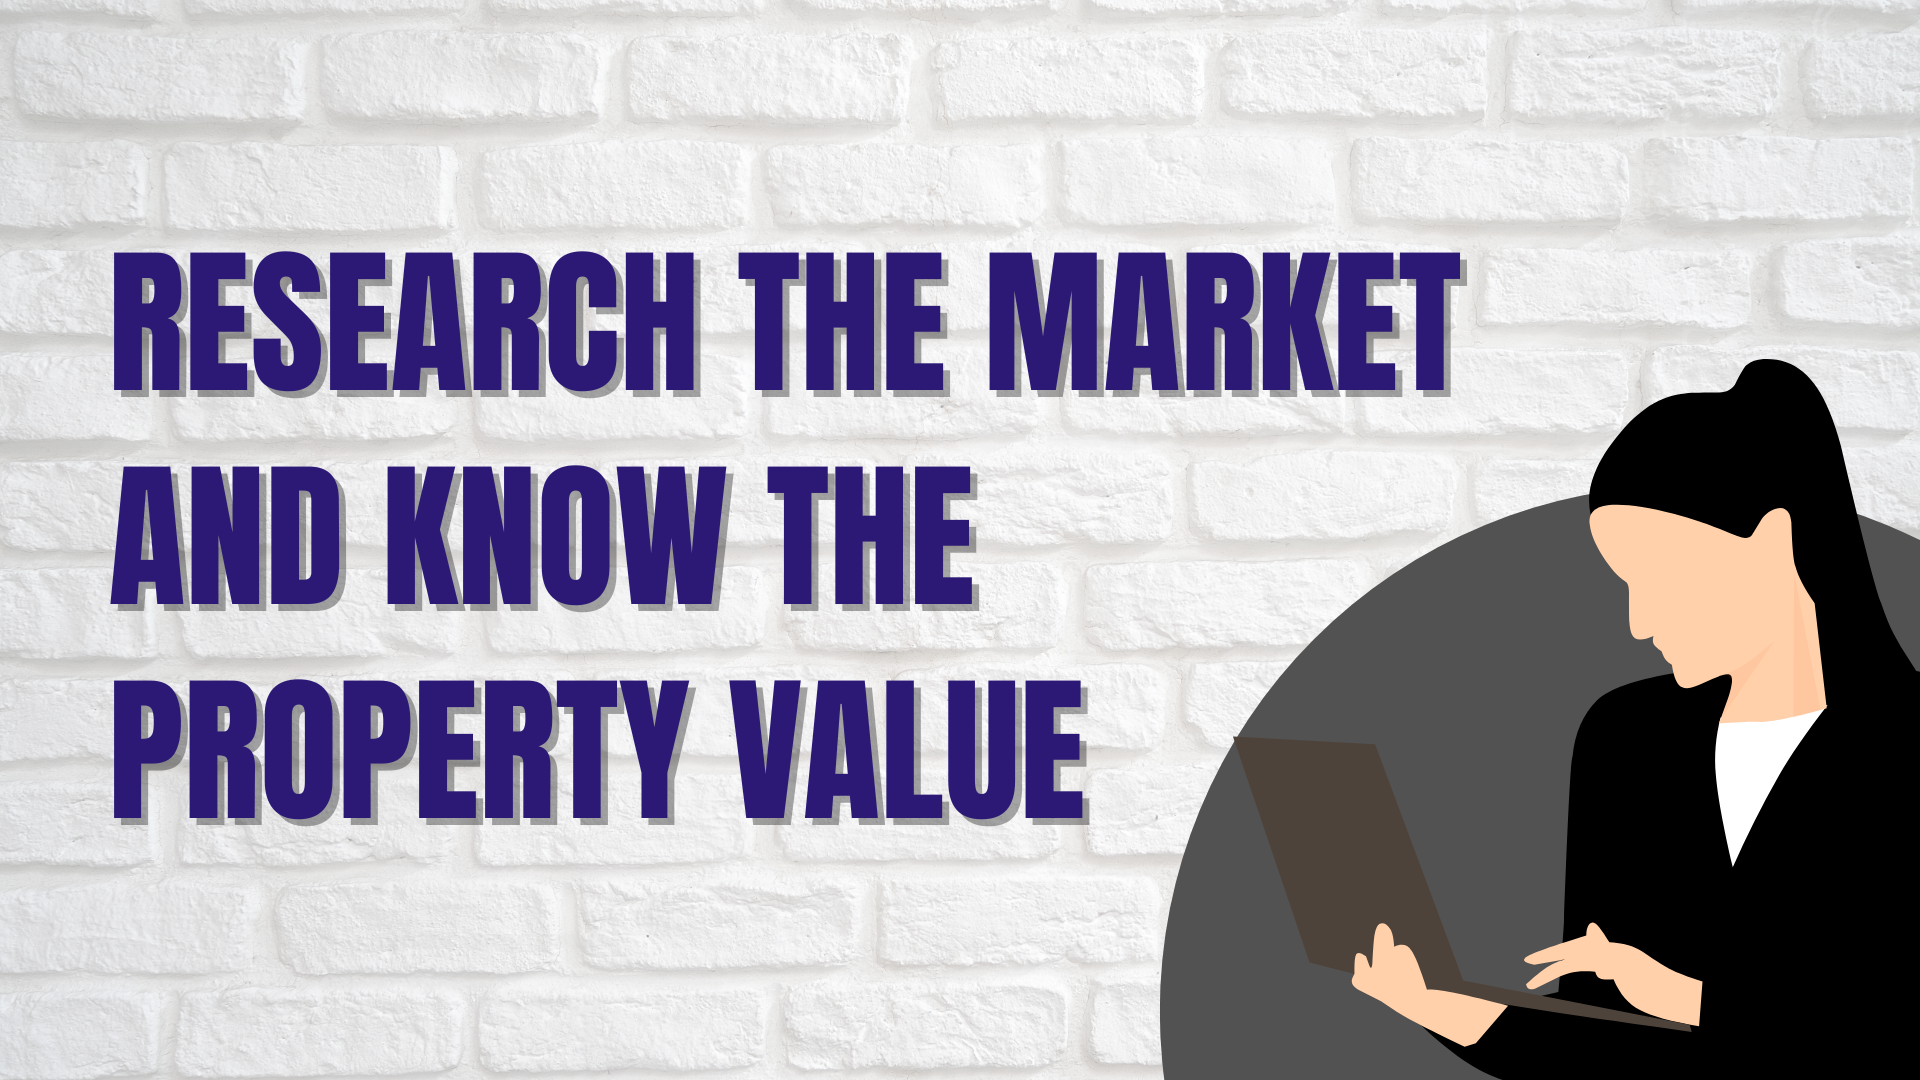 Research the Market and Know the Property Value